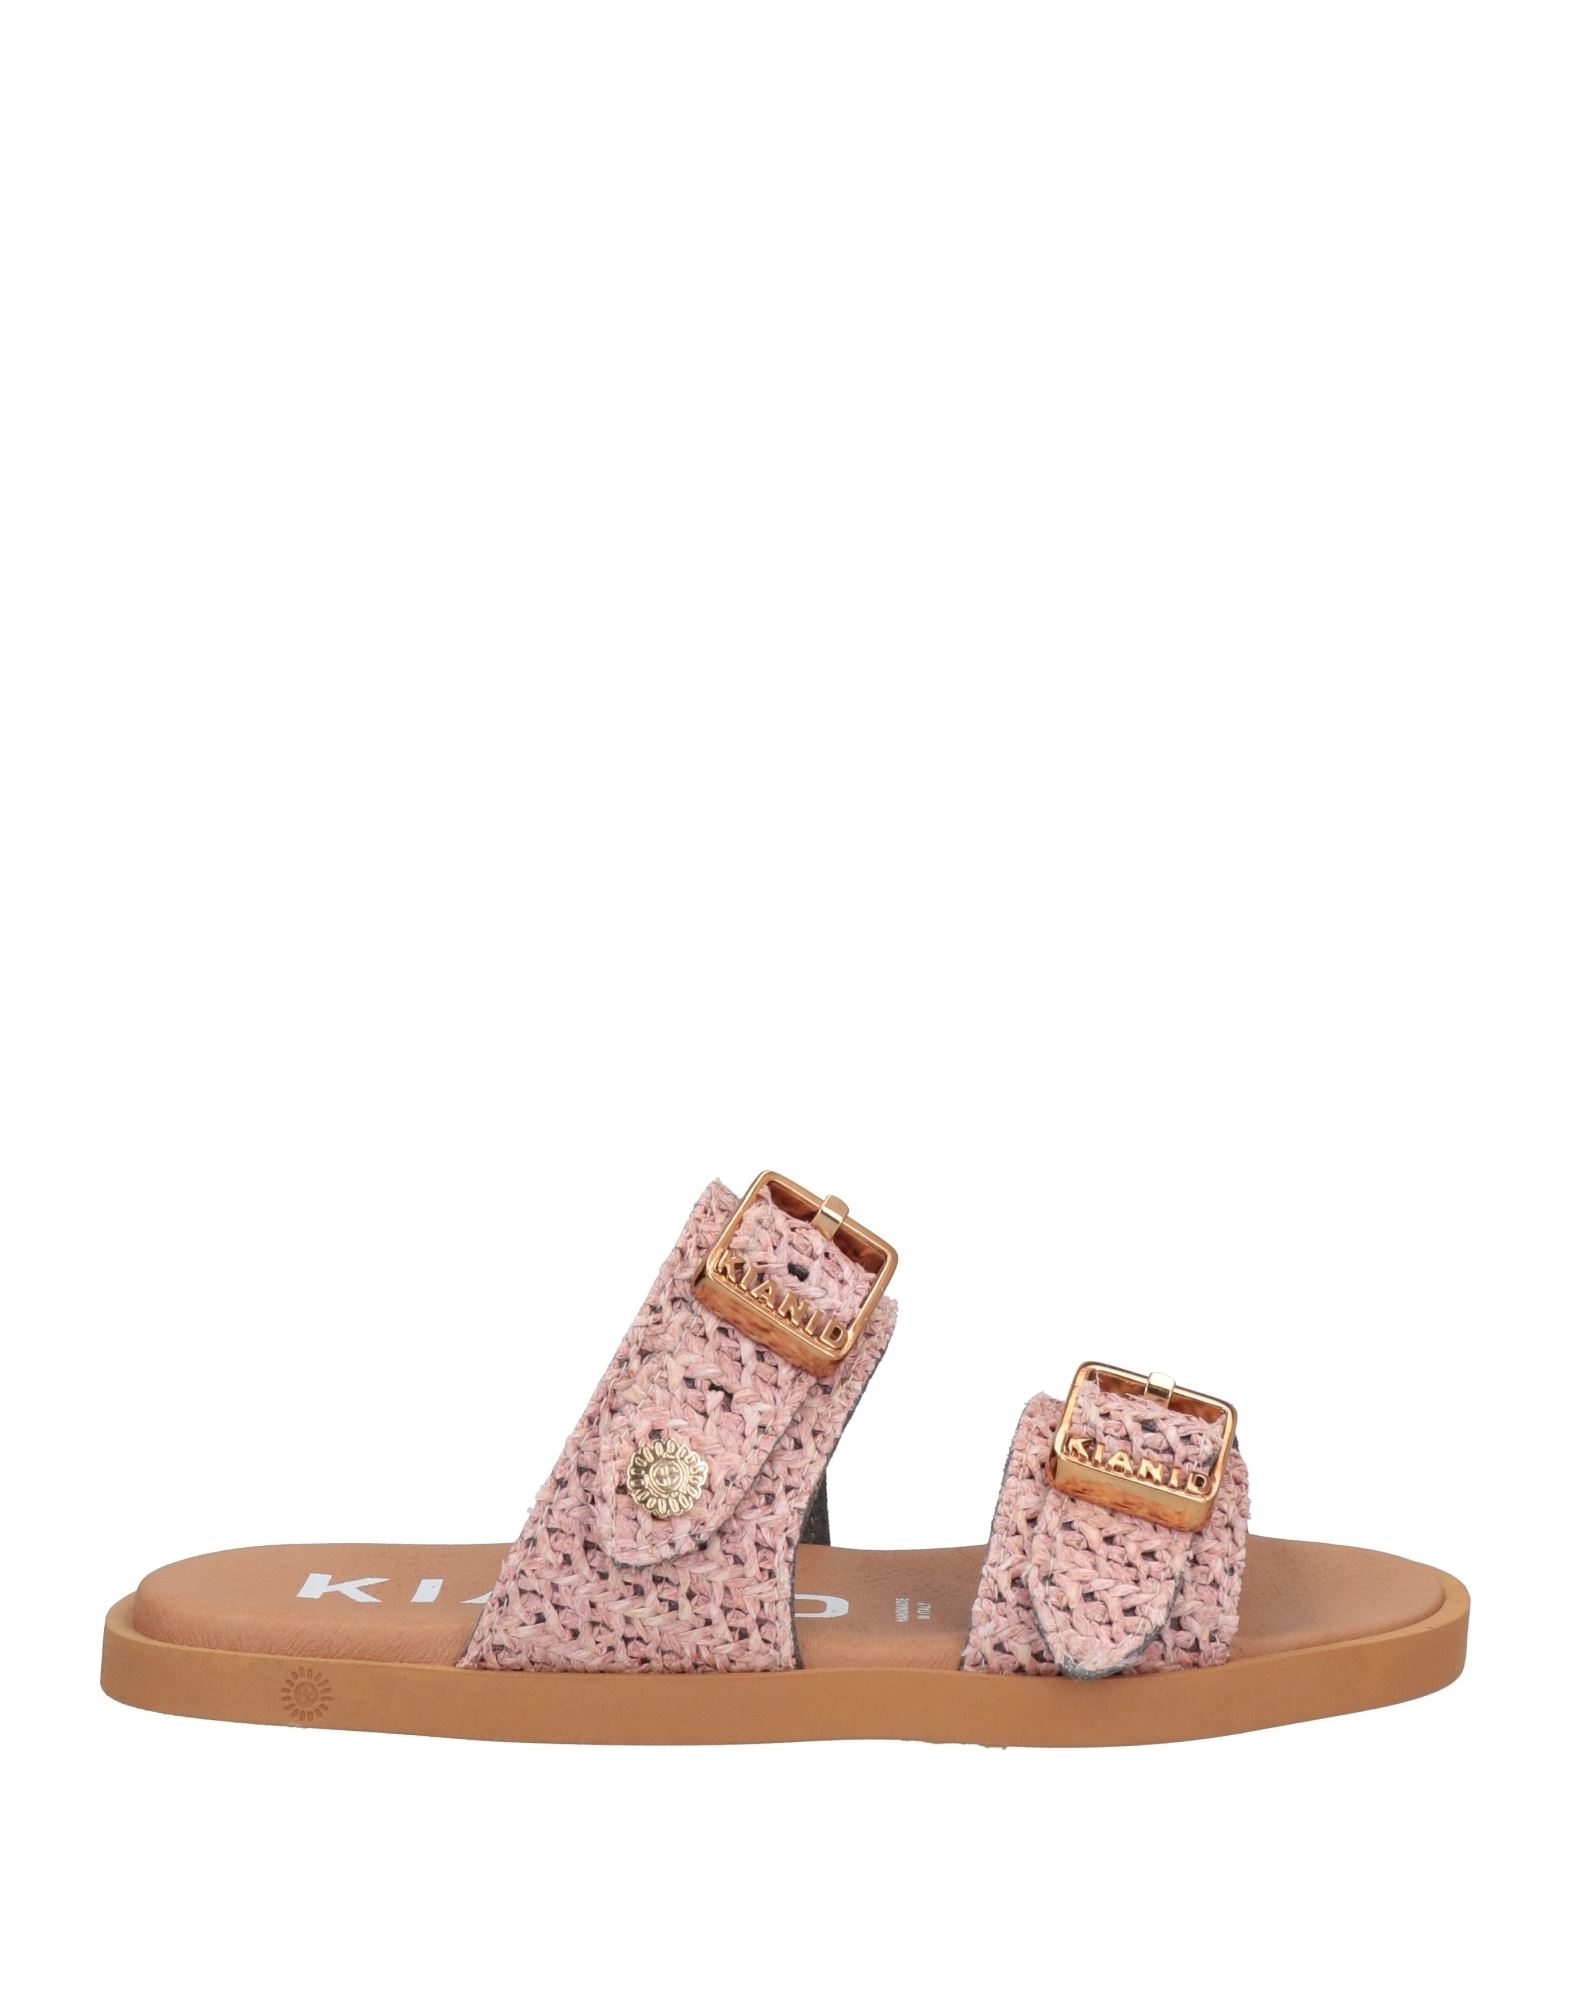 Kianid Sandals In Light Pink